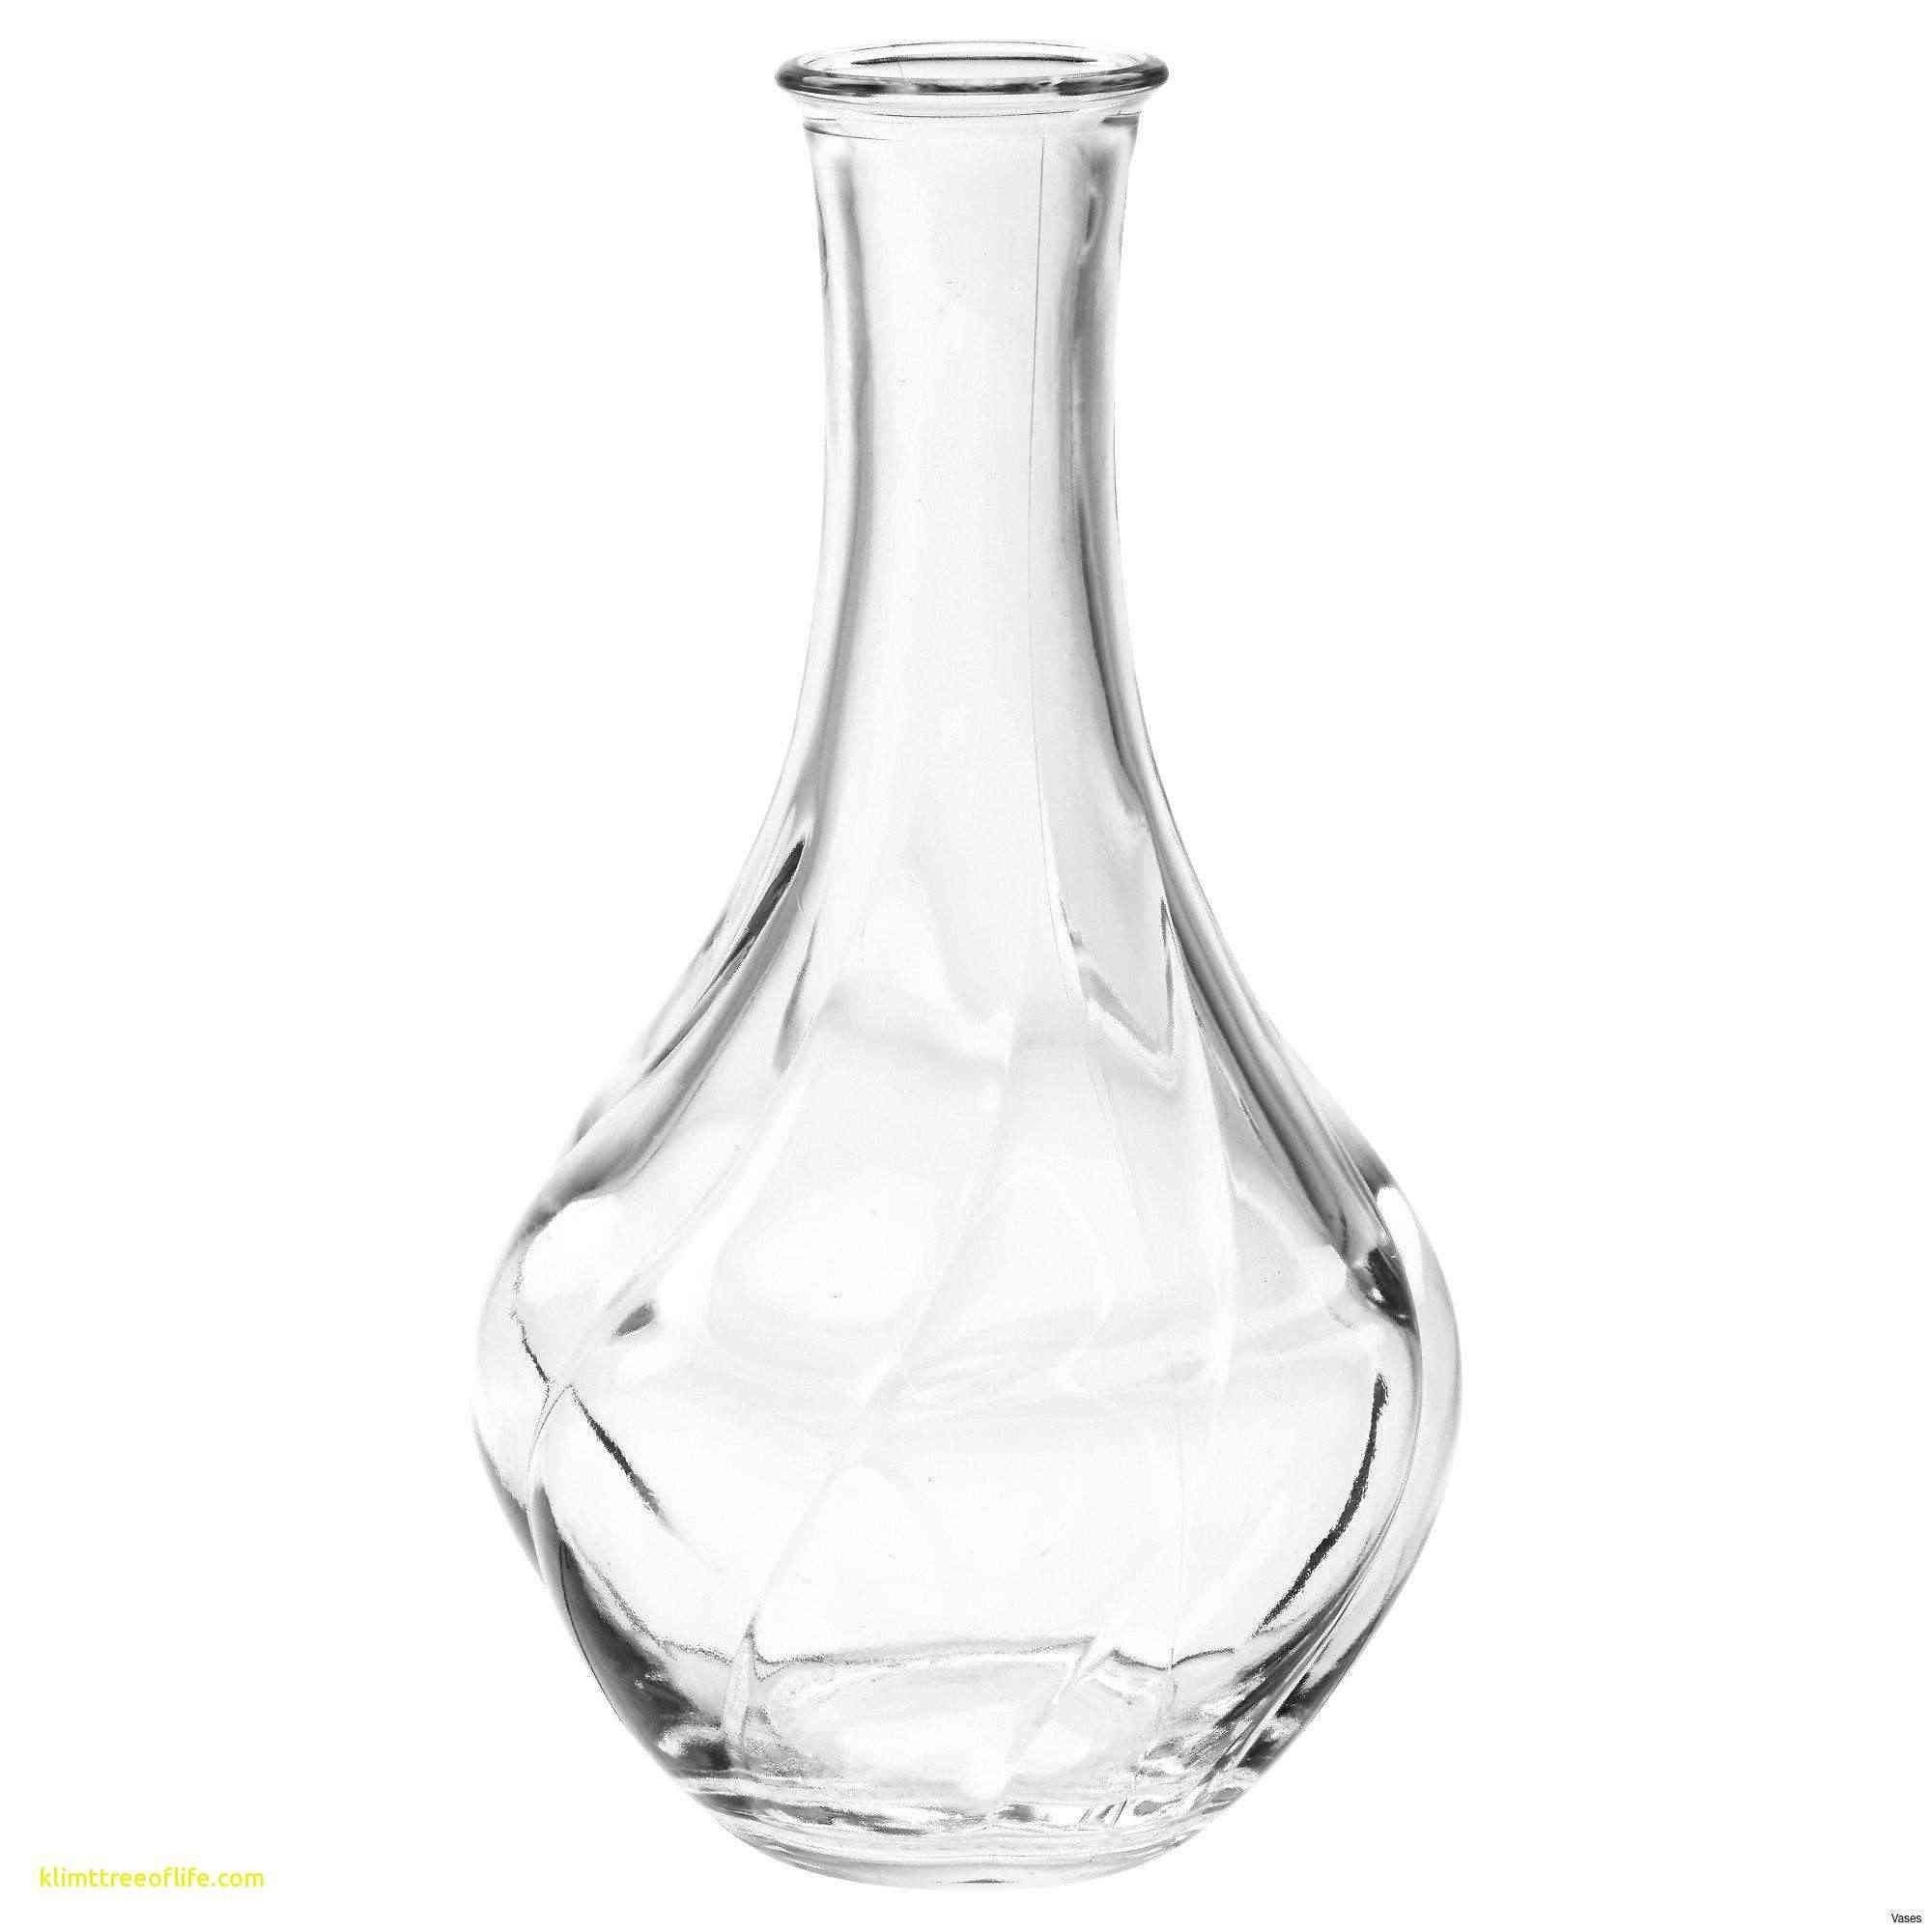 30 Awesome Libbey 6 Inch Cylinder Vase 2024 free download libbey 6 inch cylinder vase of 32 wide mouth vase the weekly world with regard to living room decor vases modern housel home design floor vase ikea k